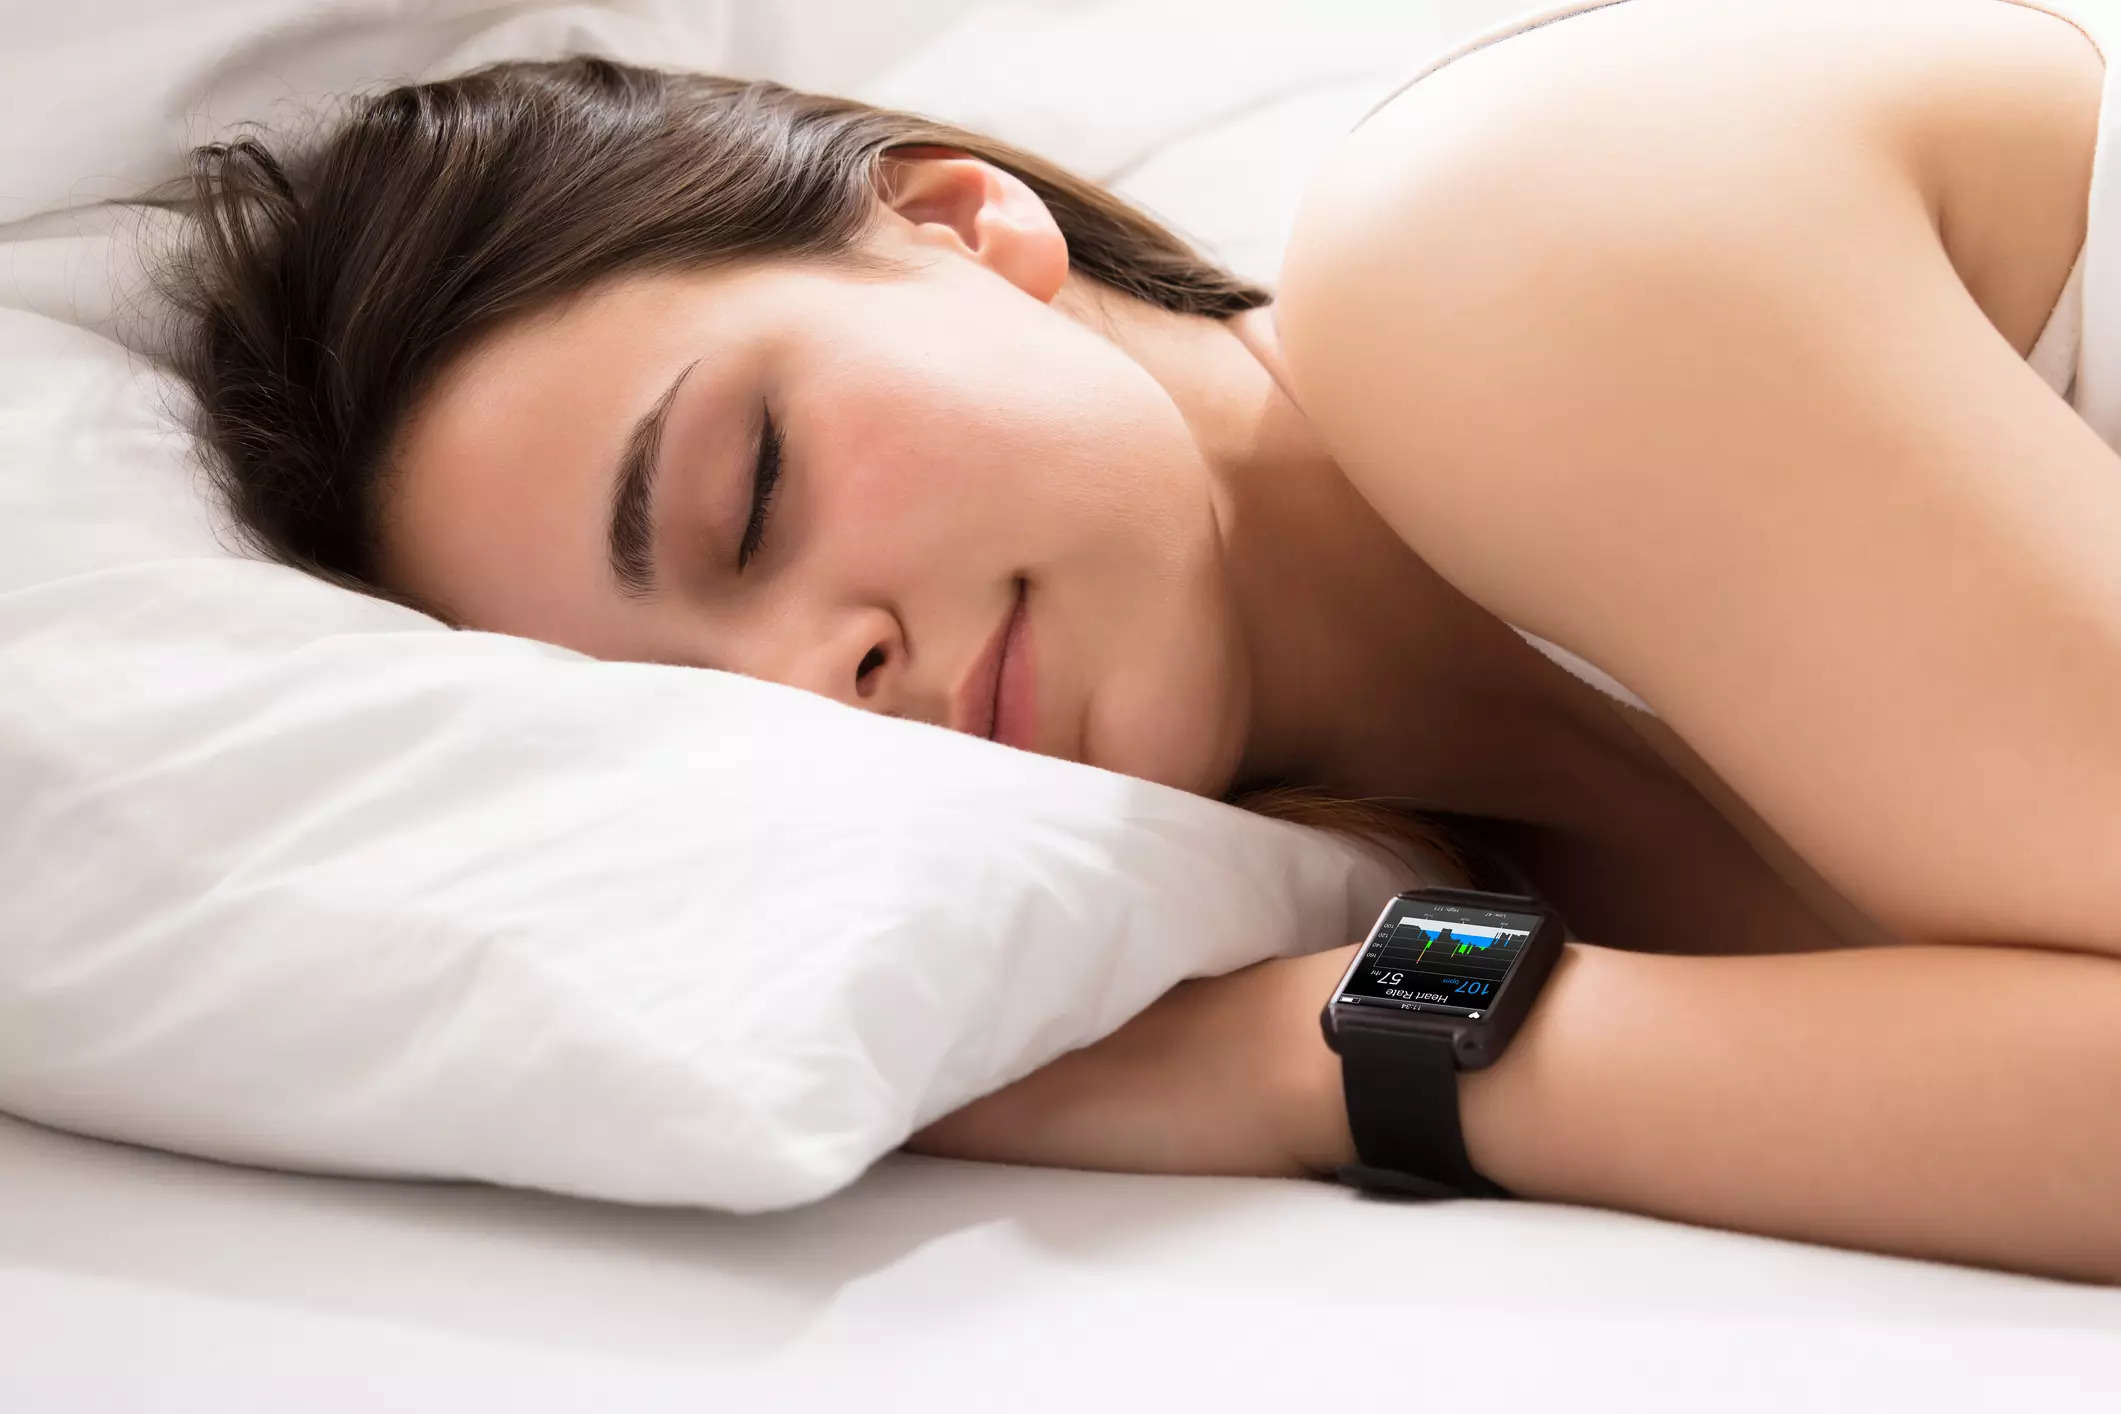 Lose weight while you snooze - Find out how sleeping can help you burn calories